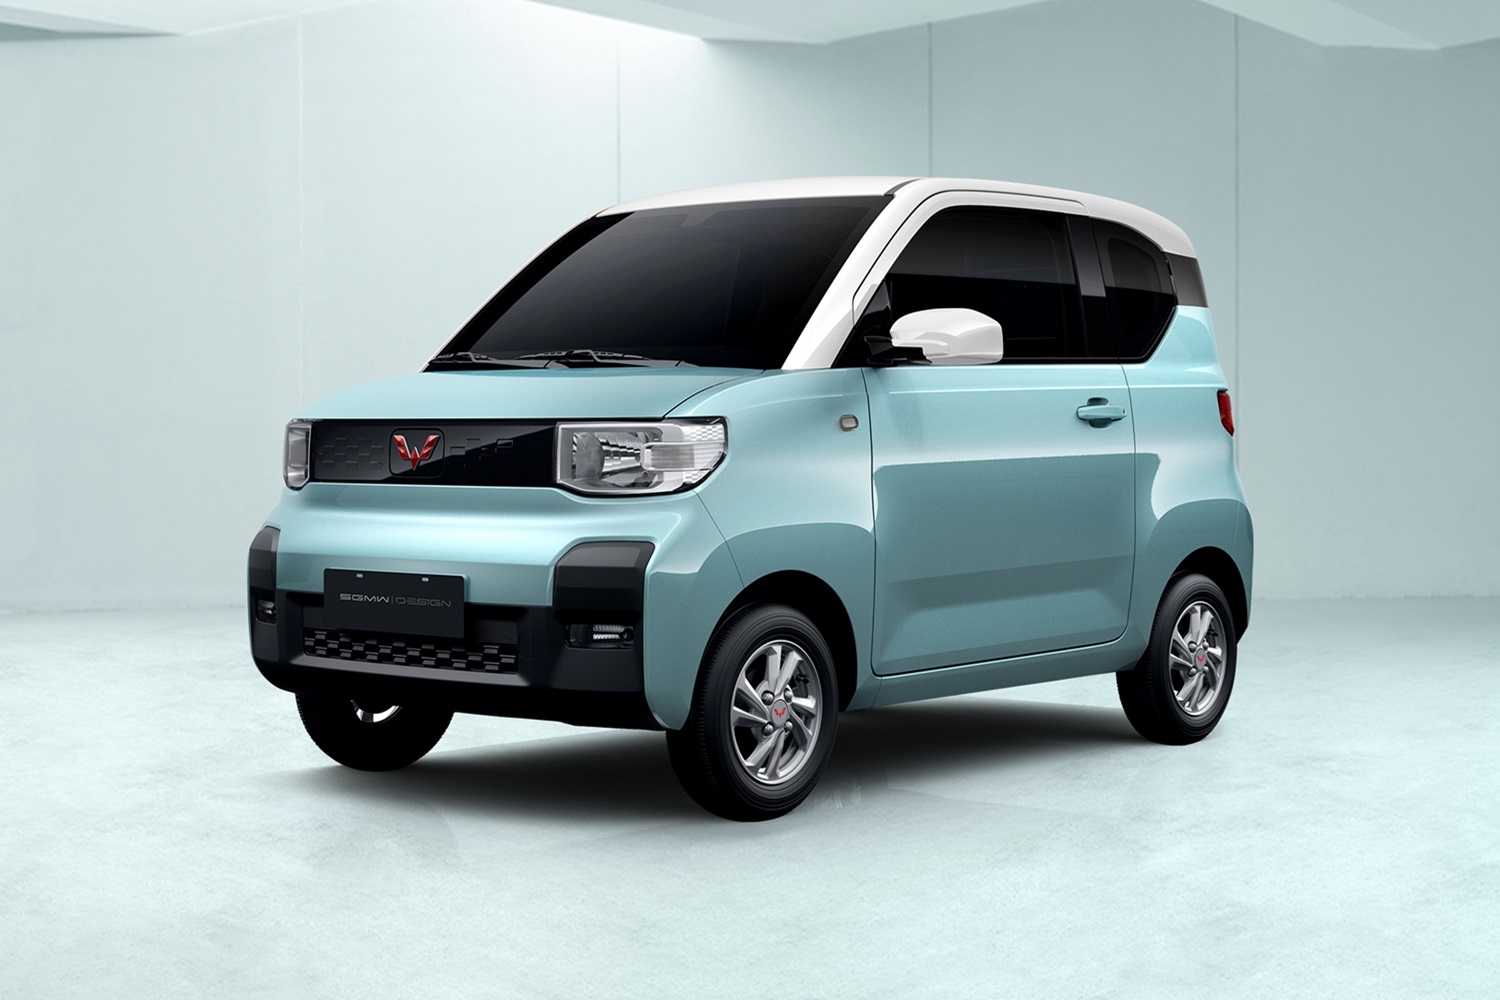 Wuling Hong Guang Ev Gets 50 000 Orders In China Gm Authority